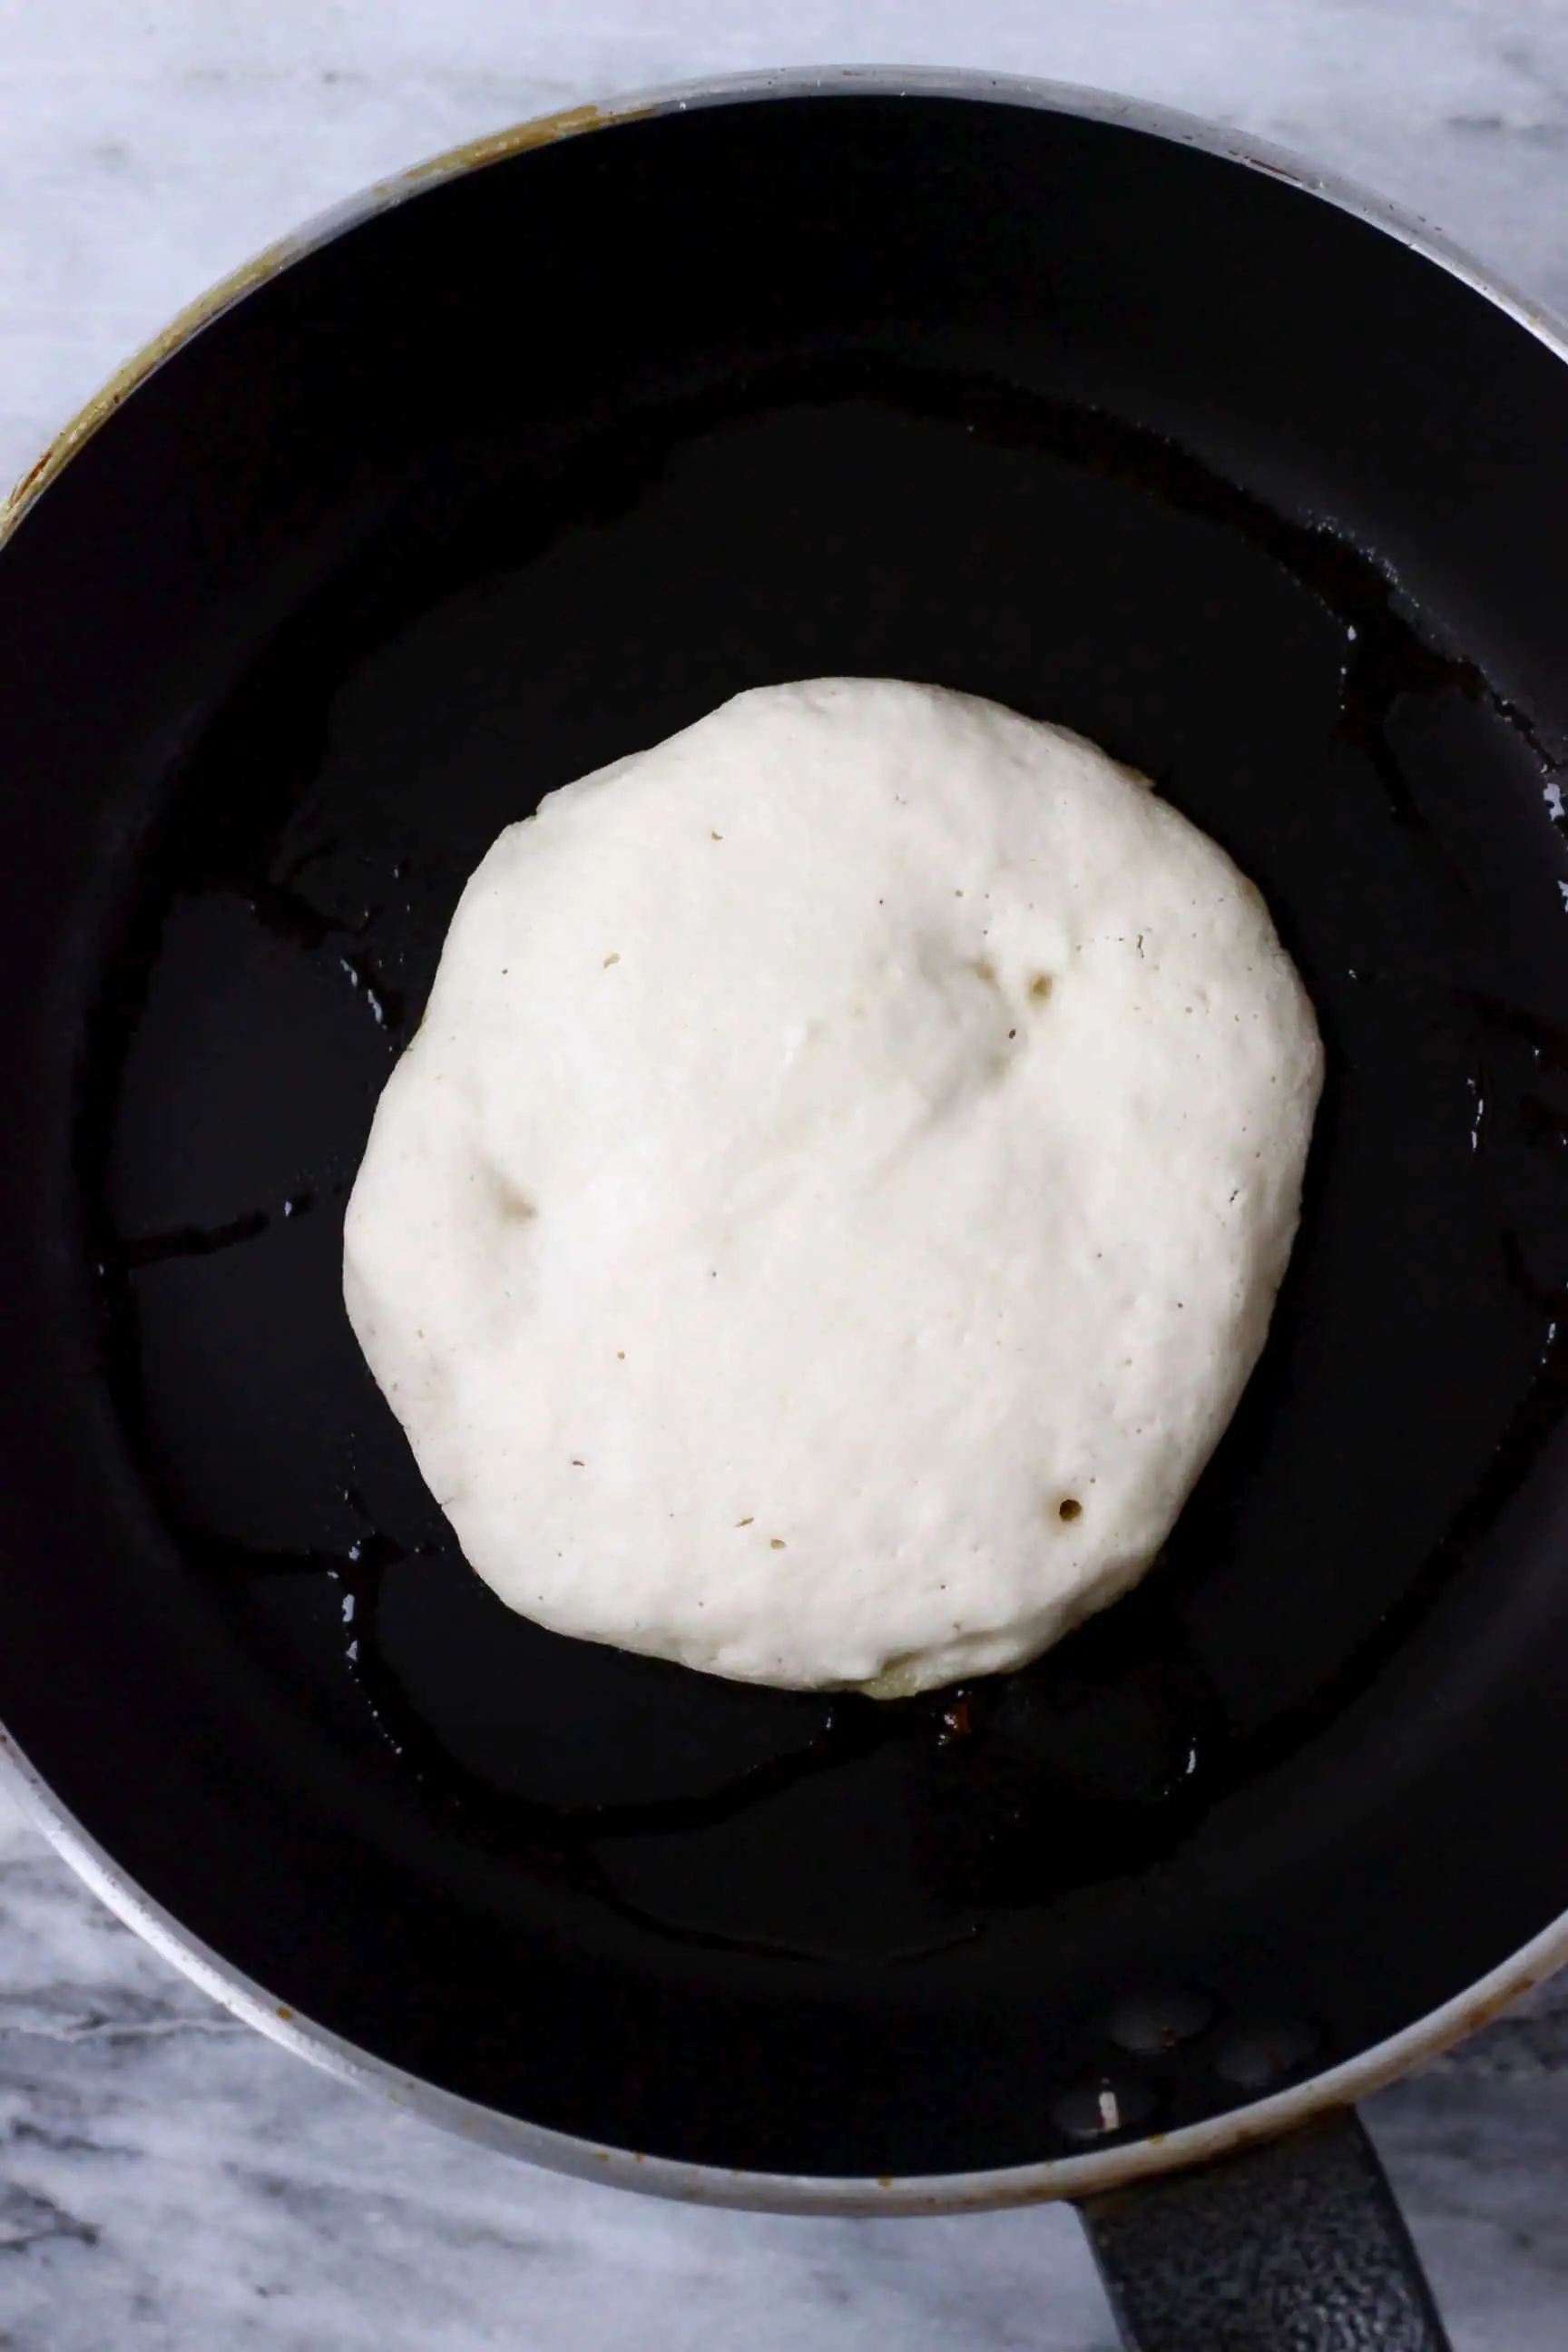 A white vegan coconut flour pancake being cooked in a black frying pan